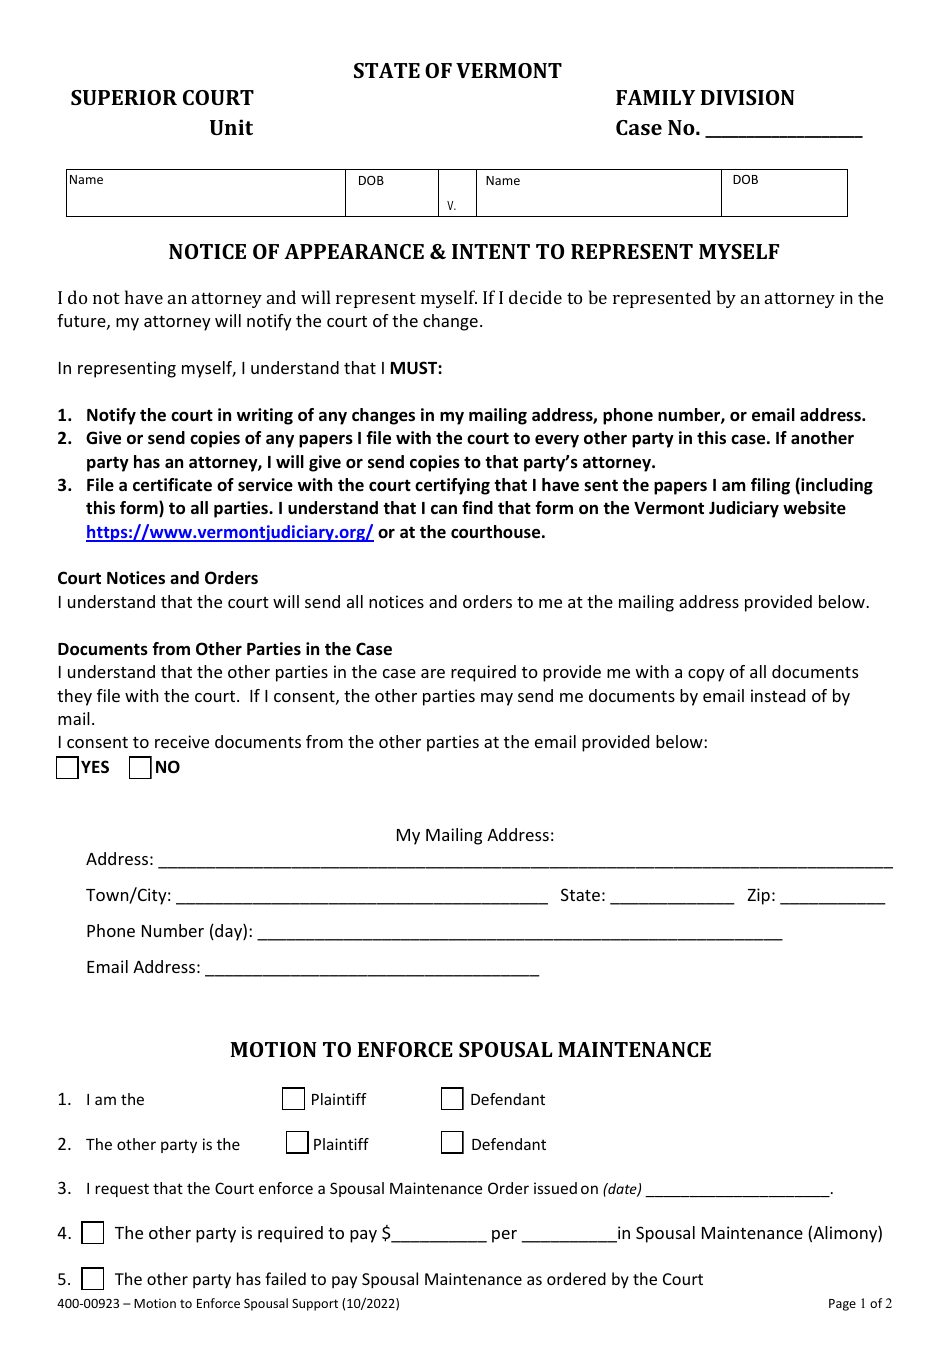 Form 400-00923 Notice of Appearance  Intent to Represent Myself - Vermont, Page 1